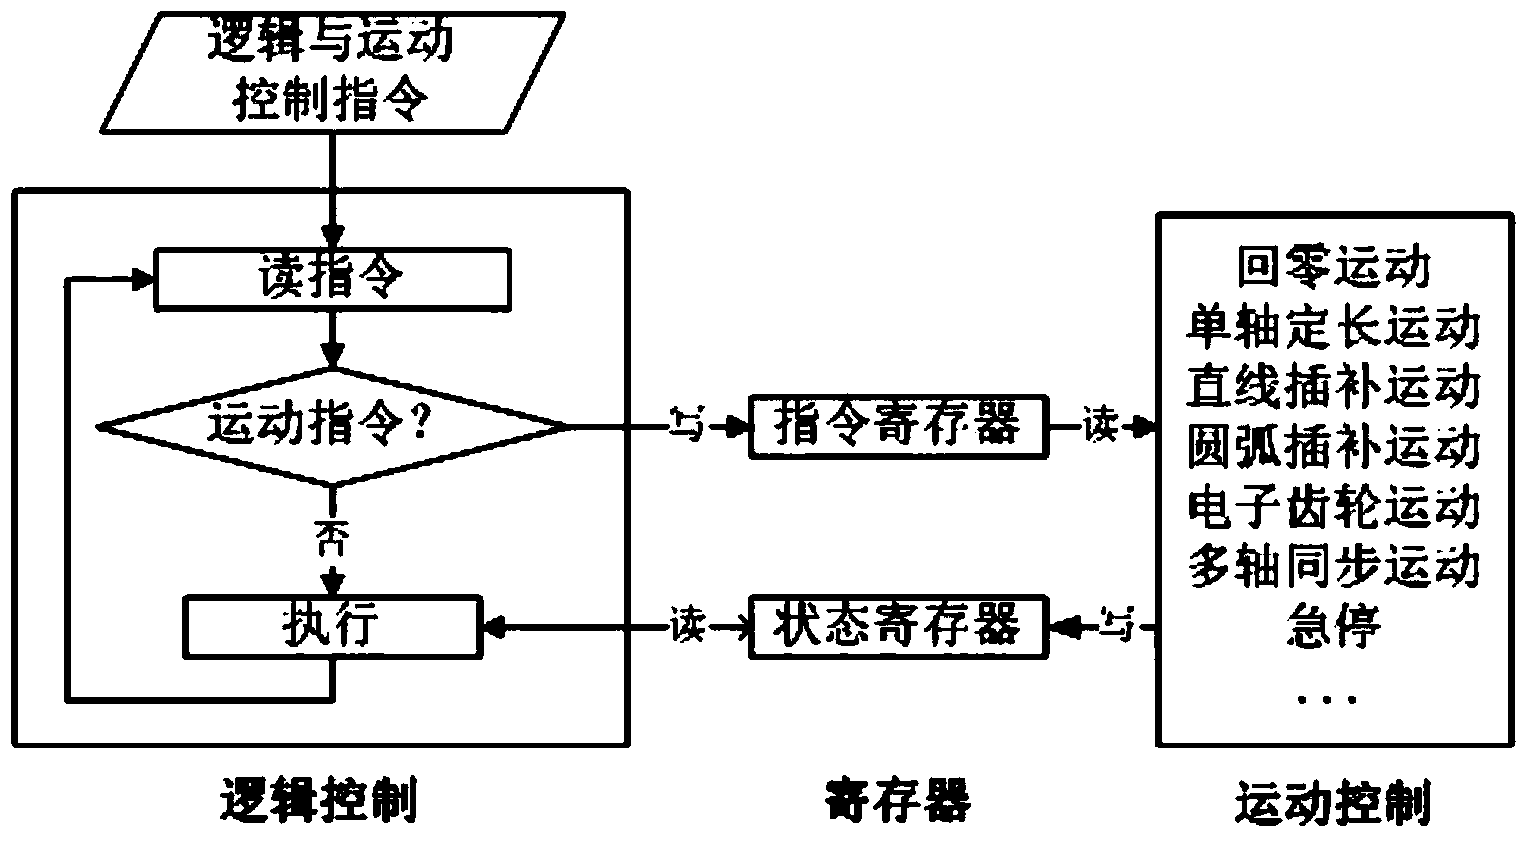 Logic and movement integrated controller